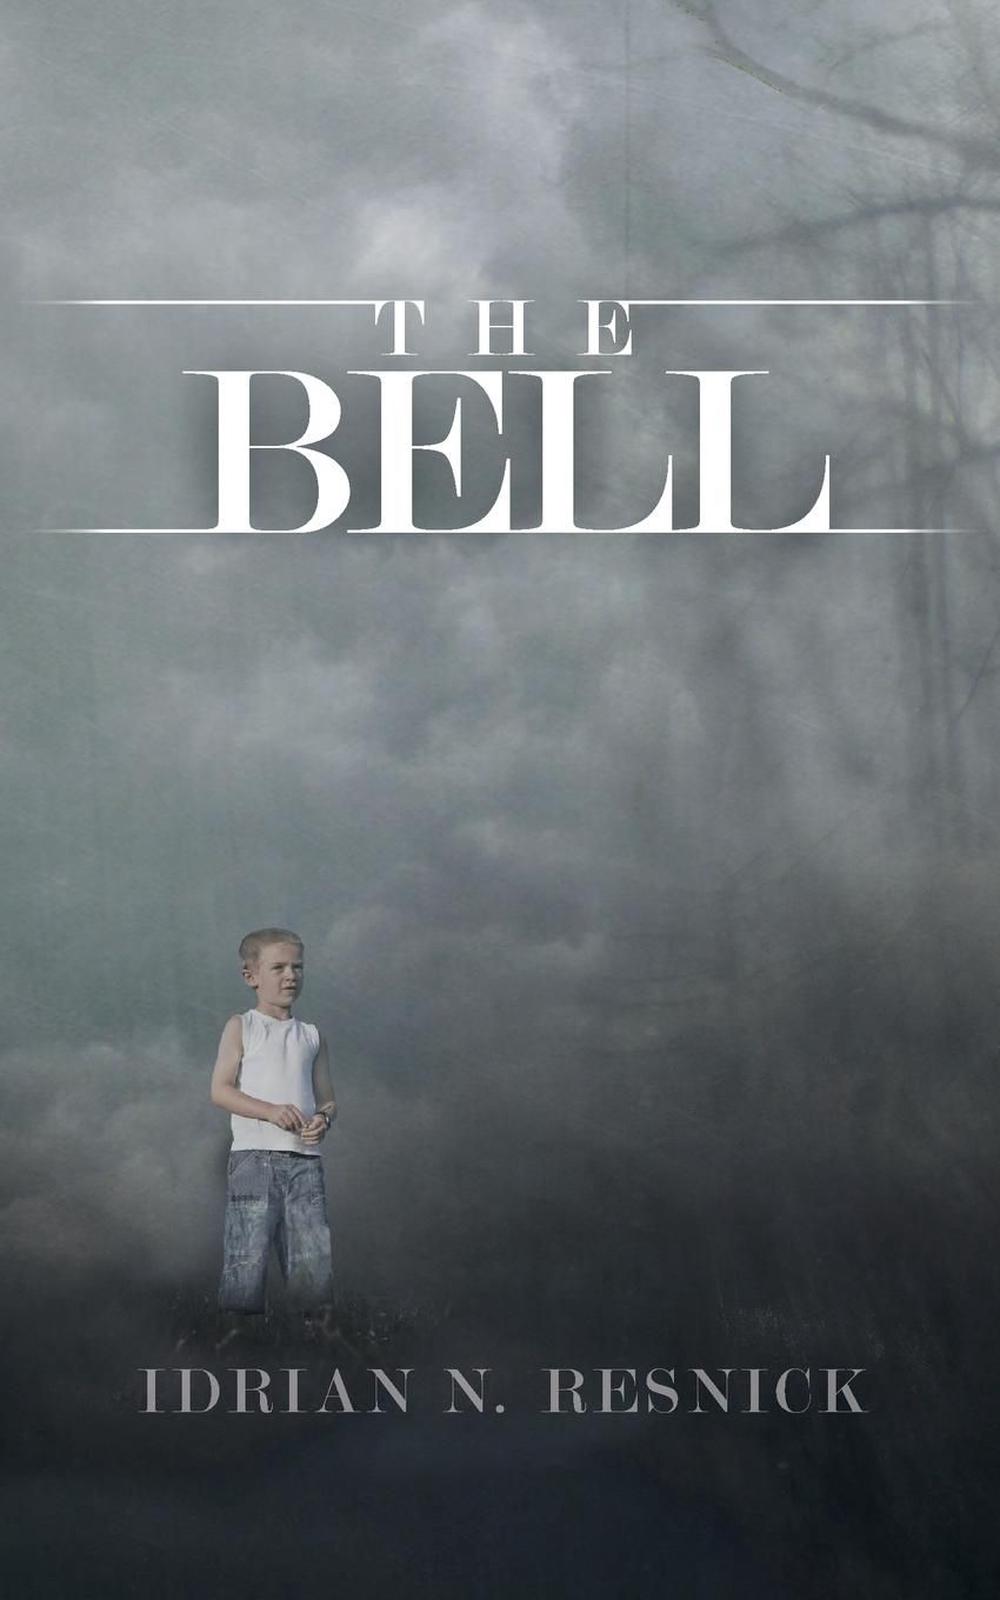 the bells by richard harvell